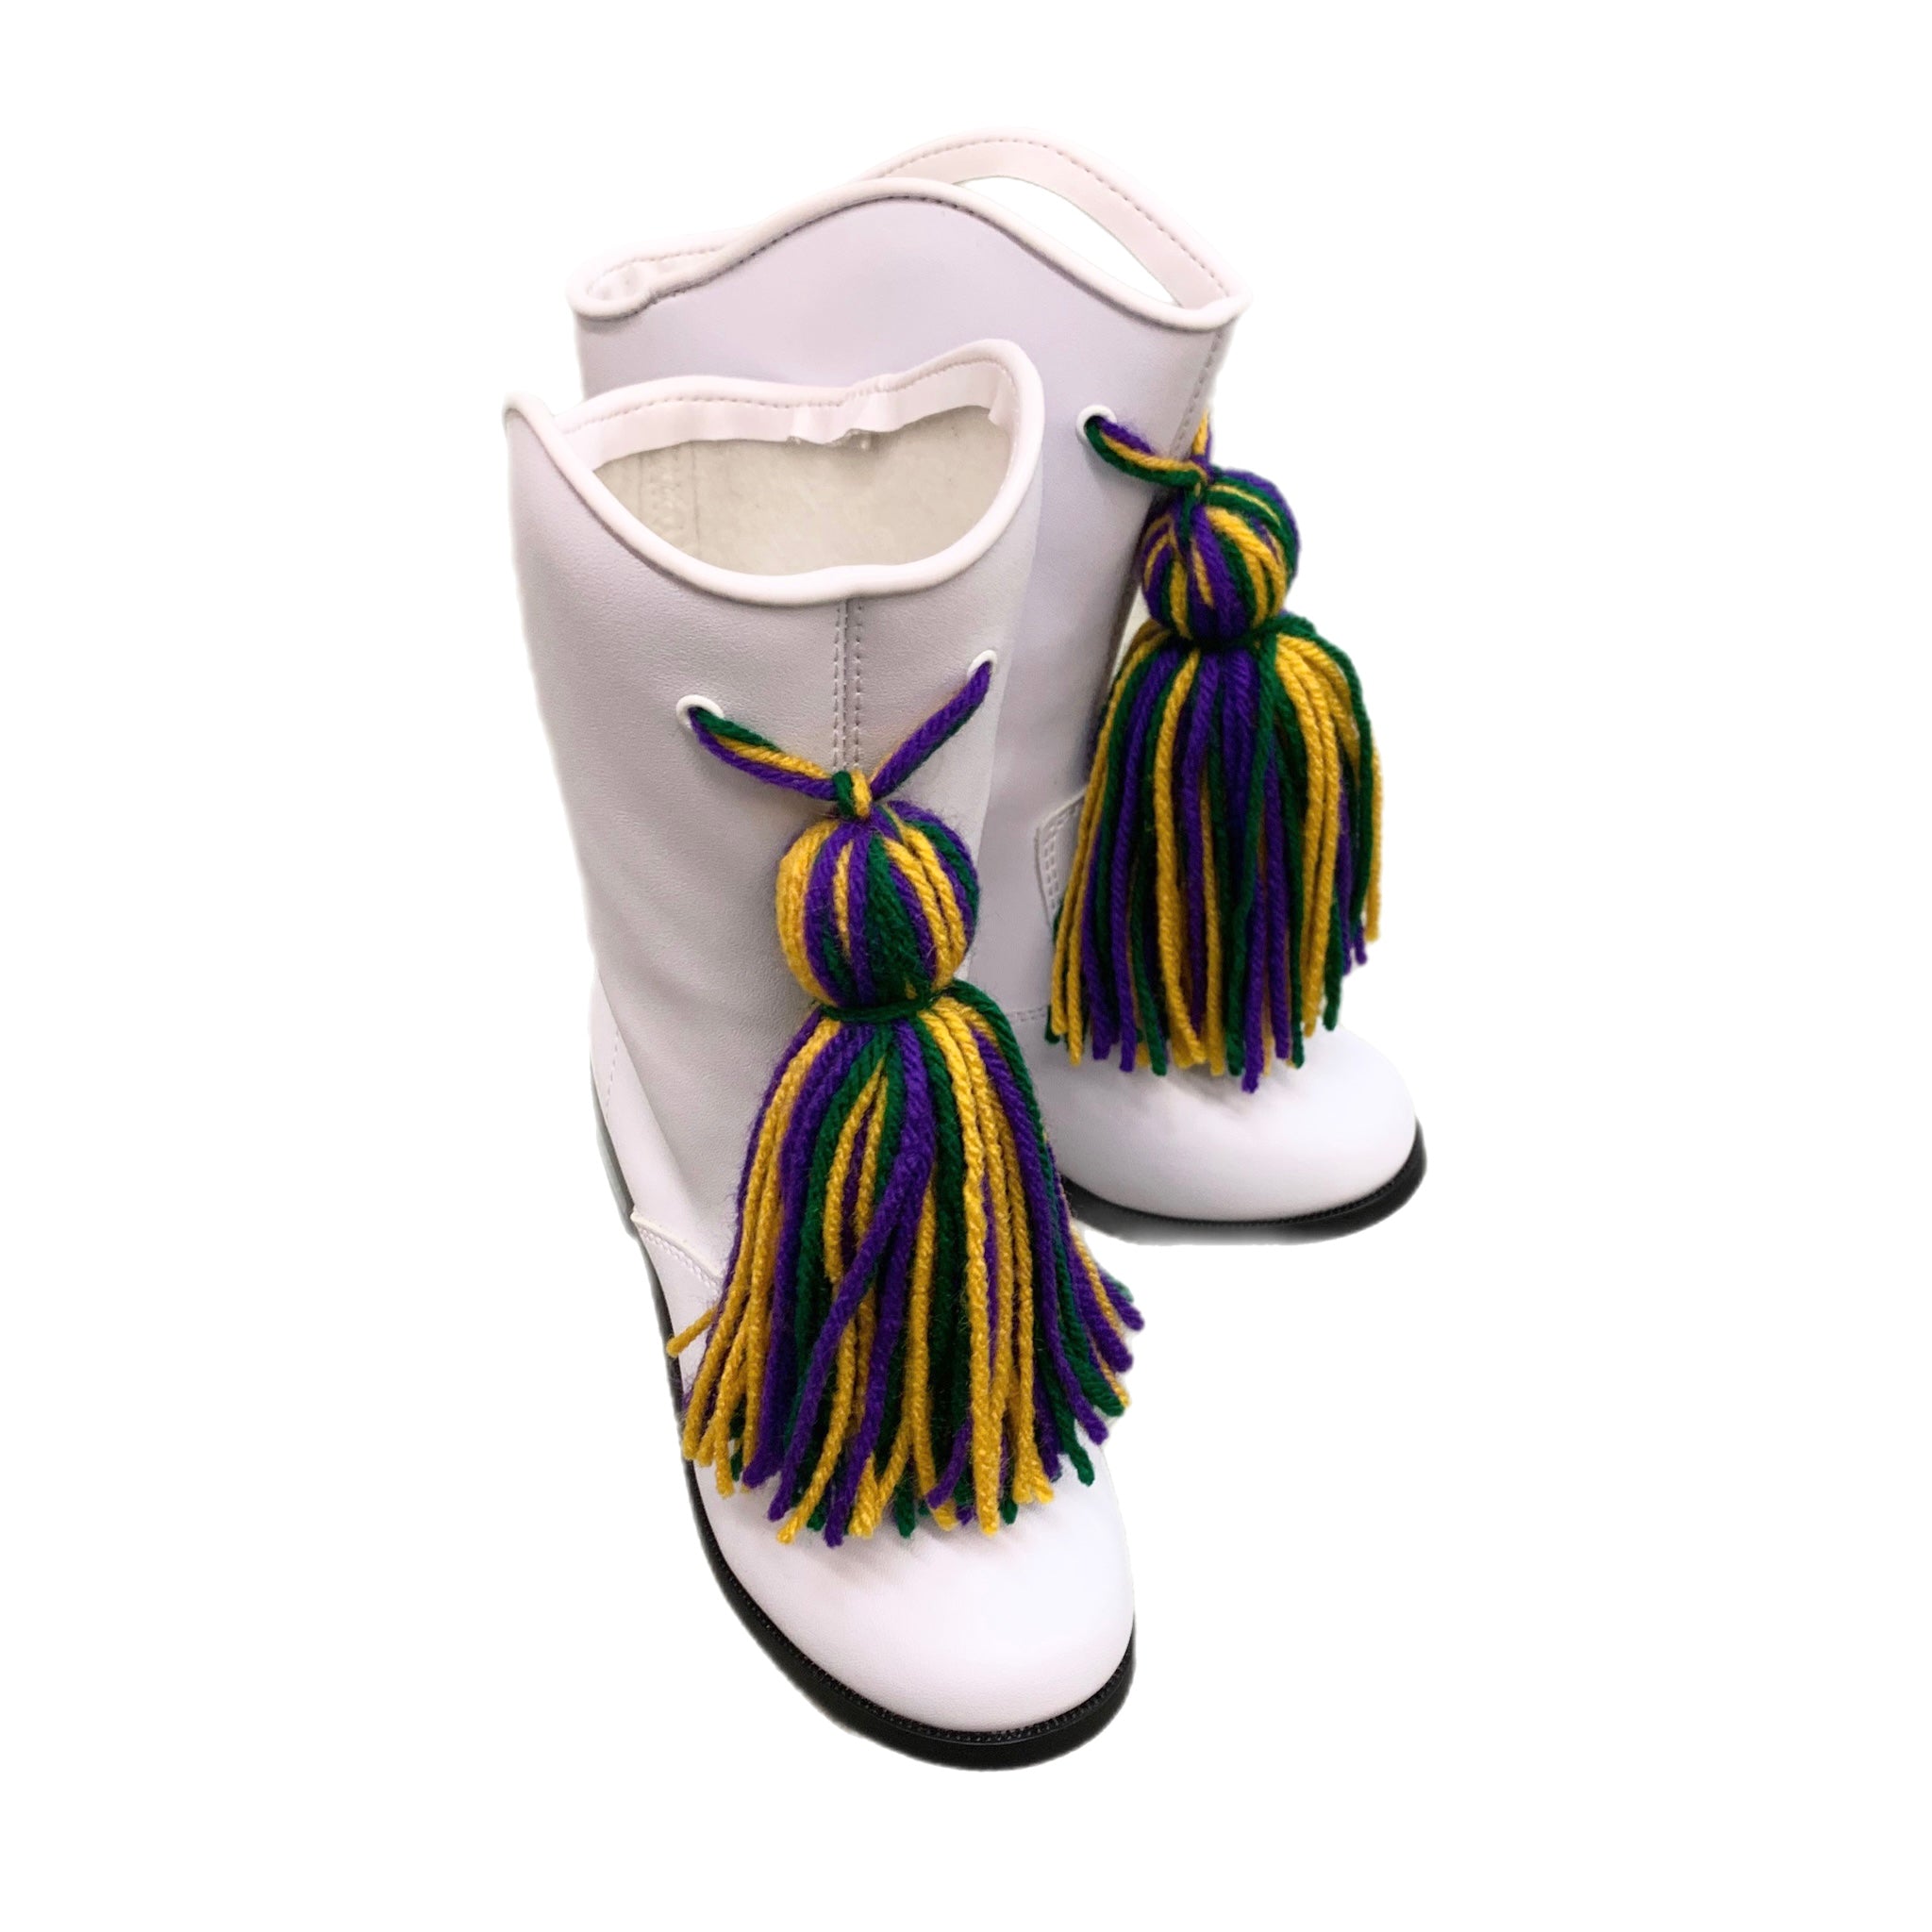 Marching Boots Ornament